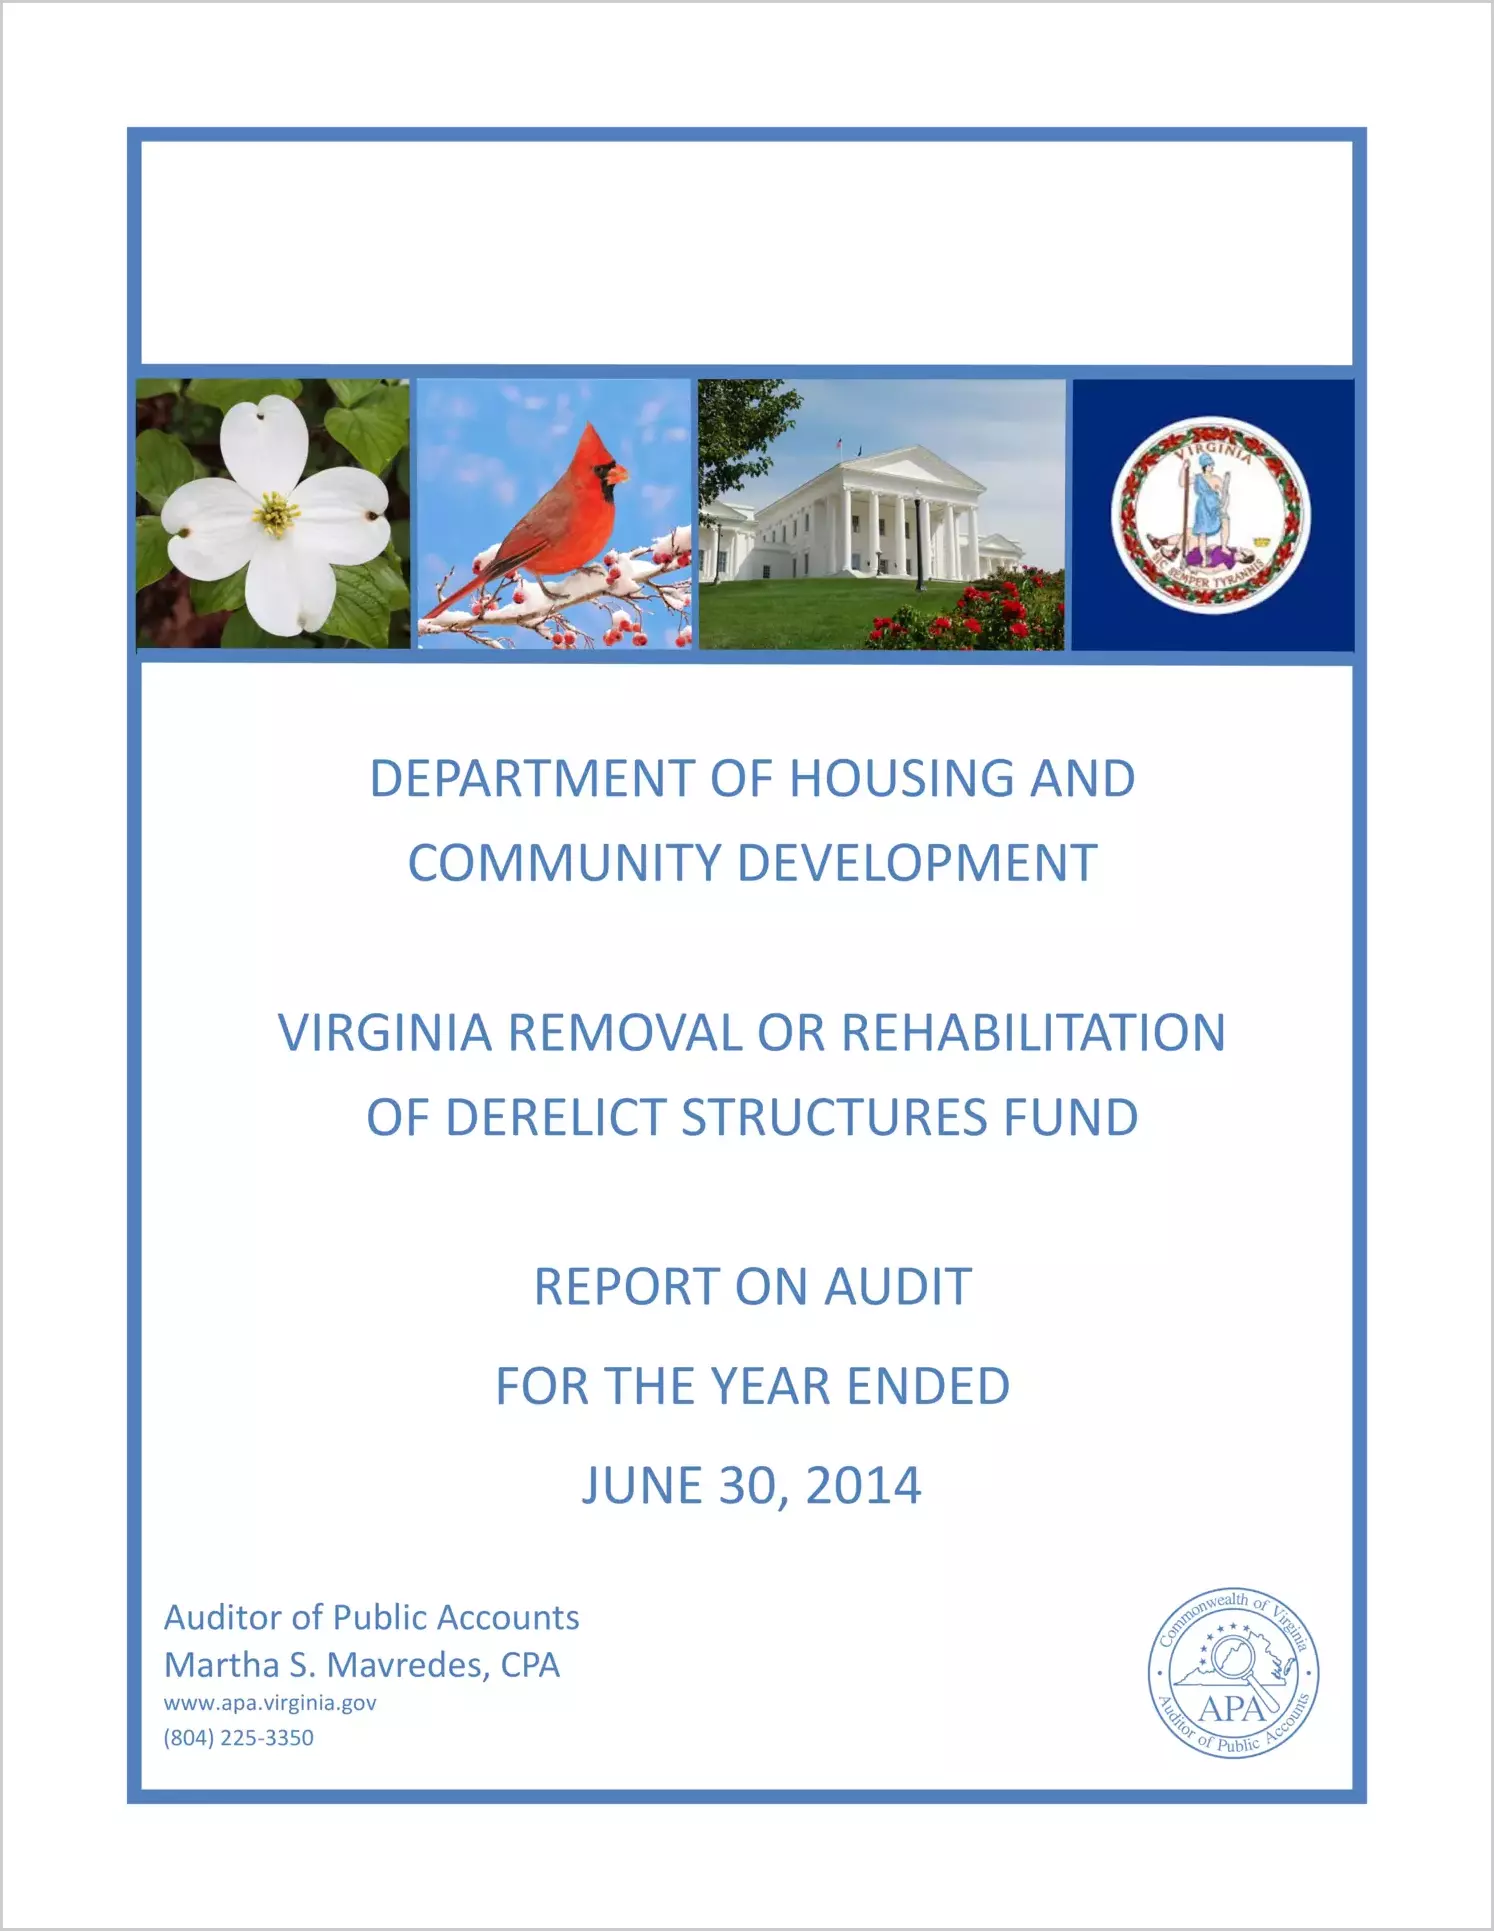 Department of Housing and Community Development  - Virginia Removal or Rehabilitation of Derelict Structures Fund - Report on Audit for the year ended June 30, 2014